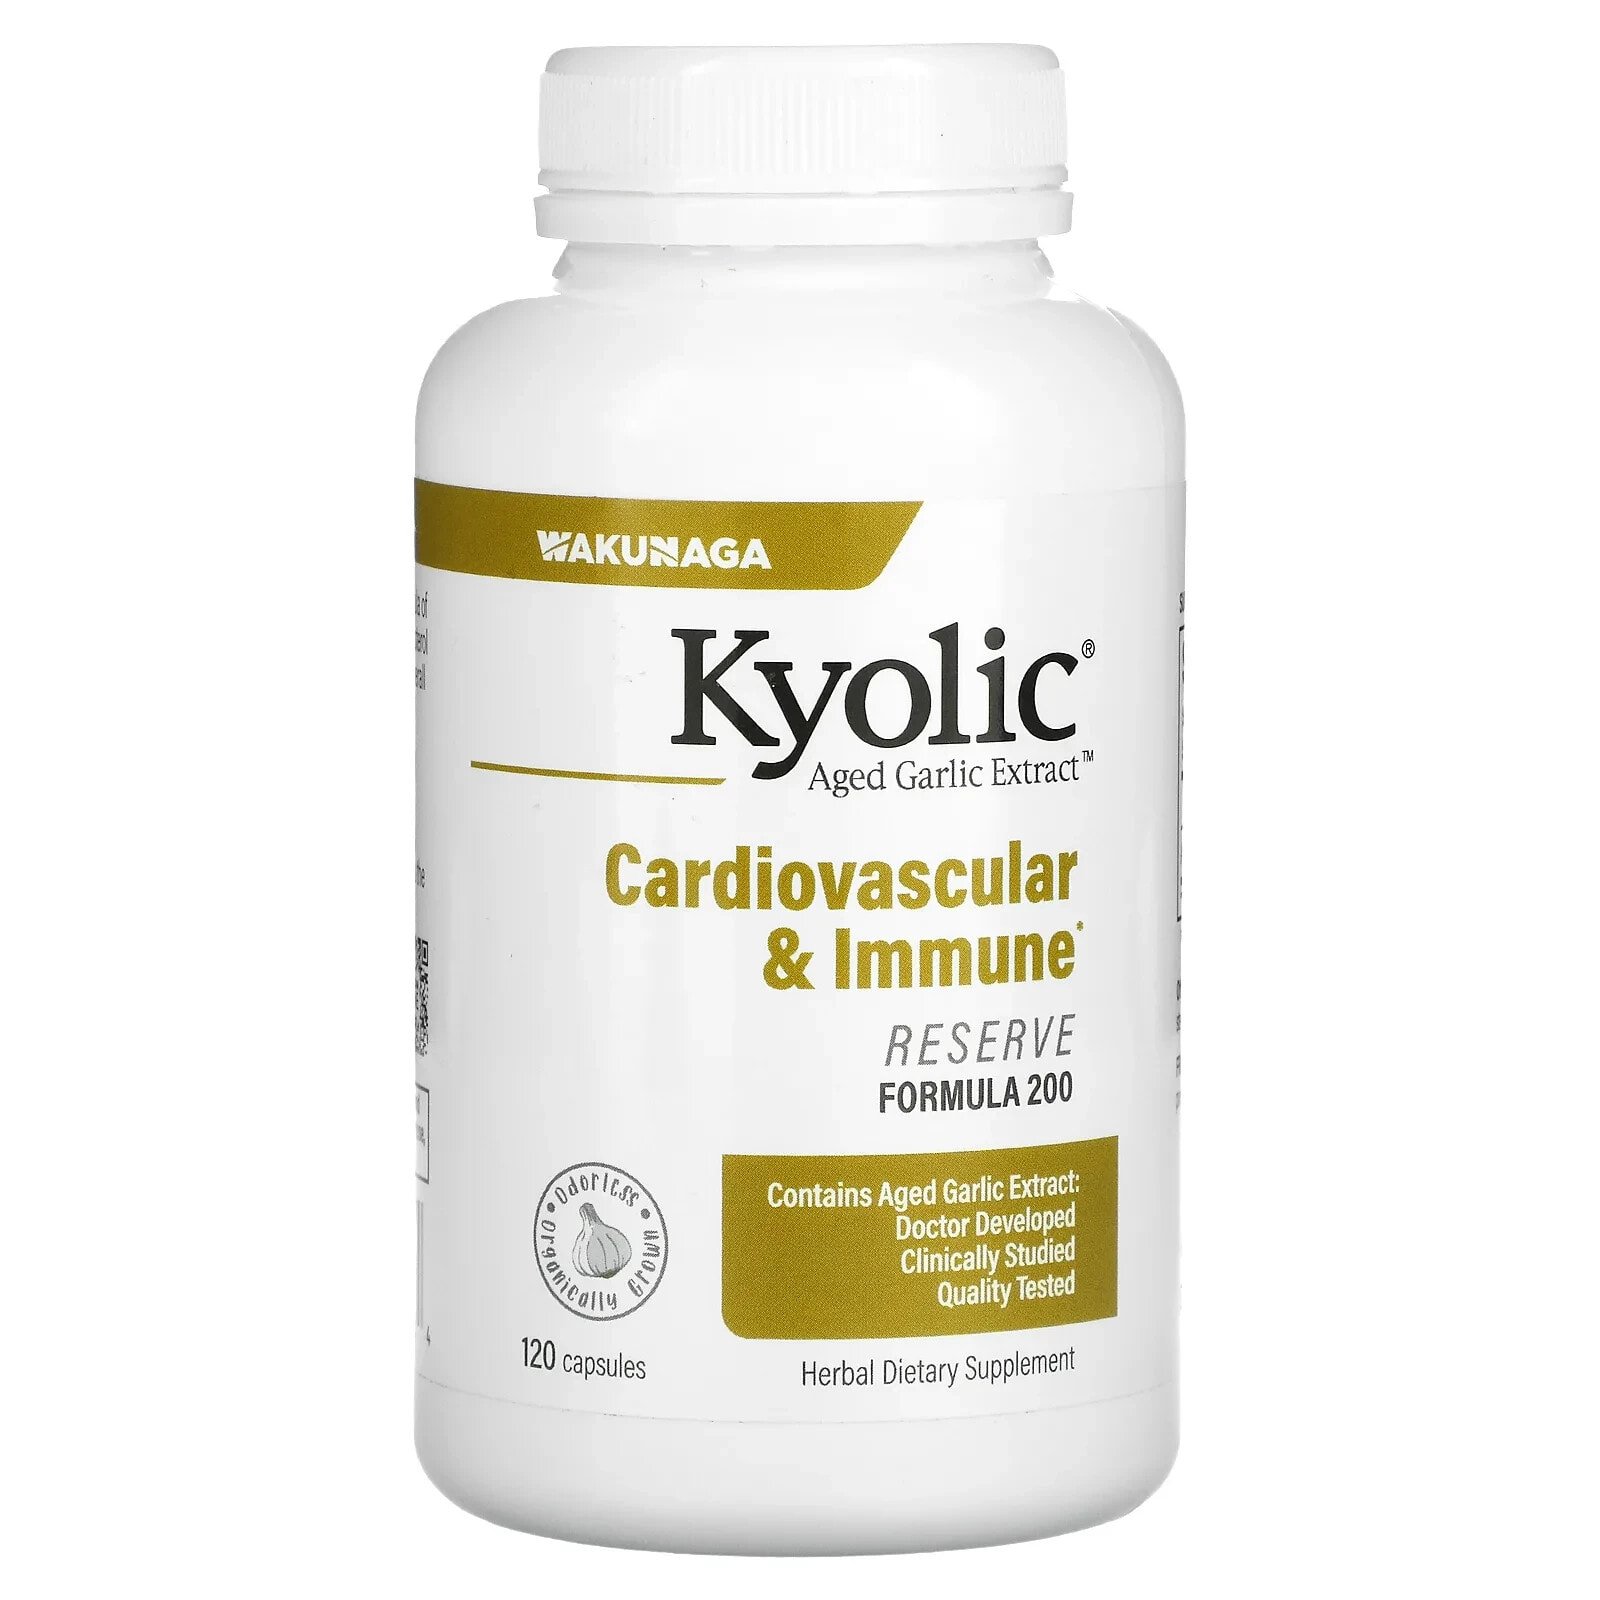 Kyolic, Aged Garlic Extract, Reserve, 60 Capsules